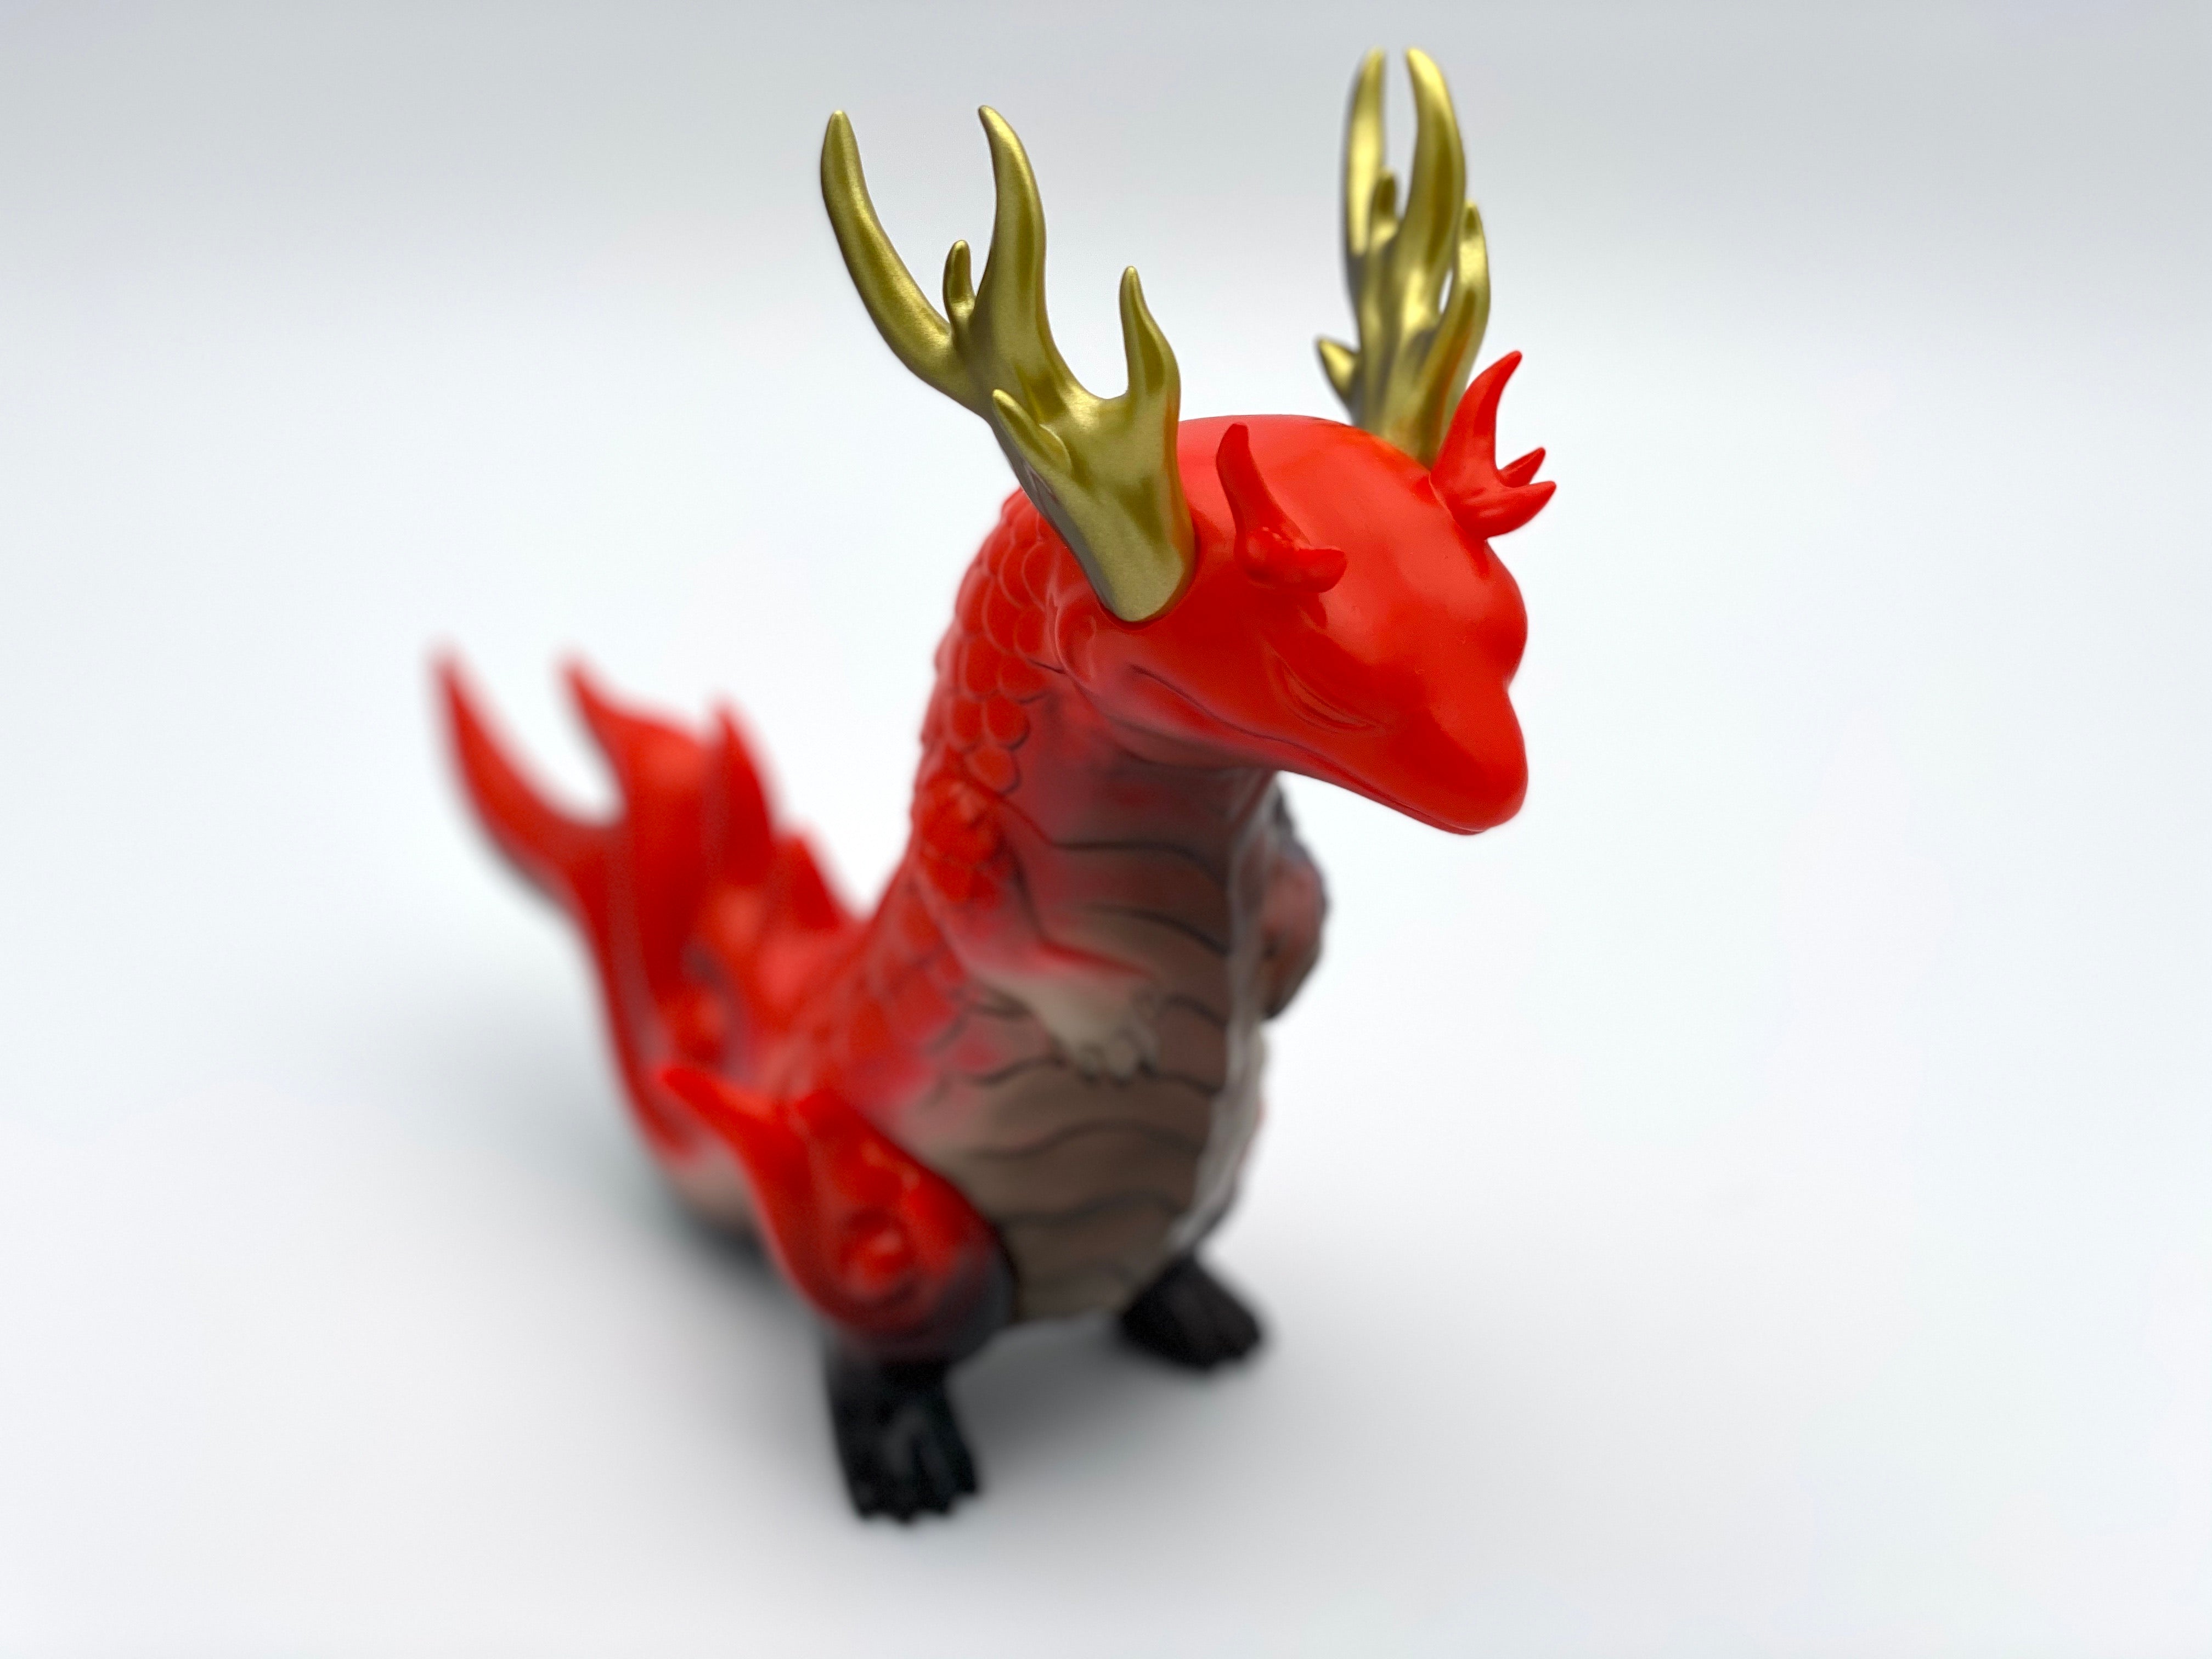 Japanese Soft Vinyl Rinkaku - Misogi By CORE Kashi figurine, 15cm tall, 18cm from nose to tail, featuring a dragon toy with gold antlers.